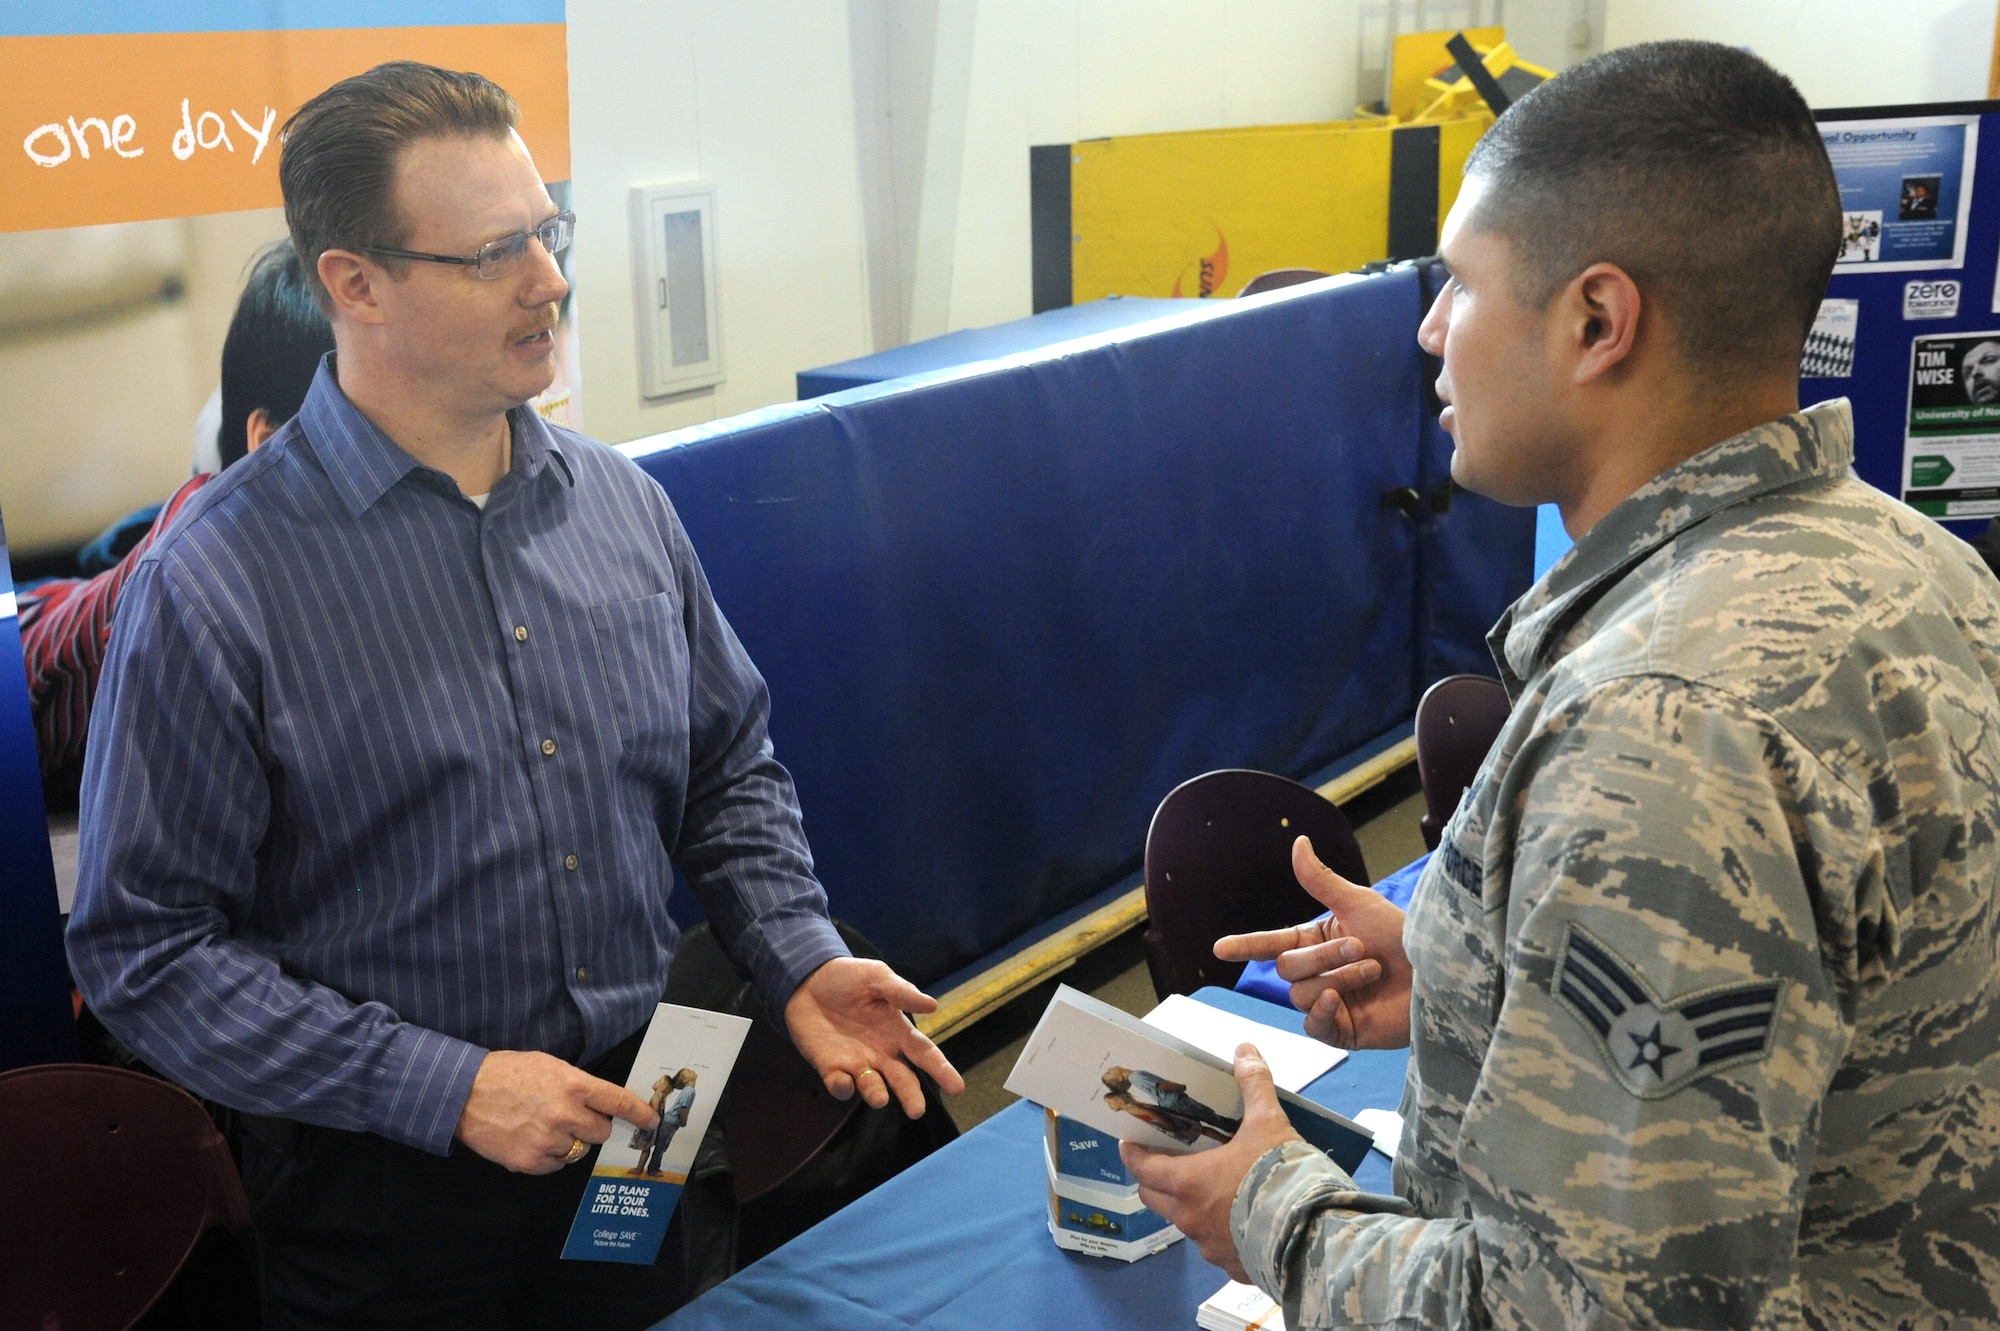 Senior Airman Maximiliano Estrada, assistant to the 319th Air Base Wing Command Chief, speaks to Lance Hill, College SAVE representative, during the Military Saves Financial Fair on Grand Forks Air Force Base, N.D., Feb. 25, 2015. Hill was one of several agency representatives sharing financial advice and information at the fair, which was hosted by the Airman & Family Readiness Center. (U.S. Air Force photo by Tech. Sgt. David Dobrydney/released)